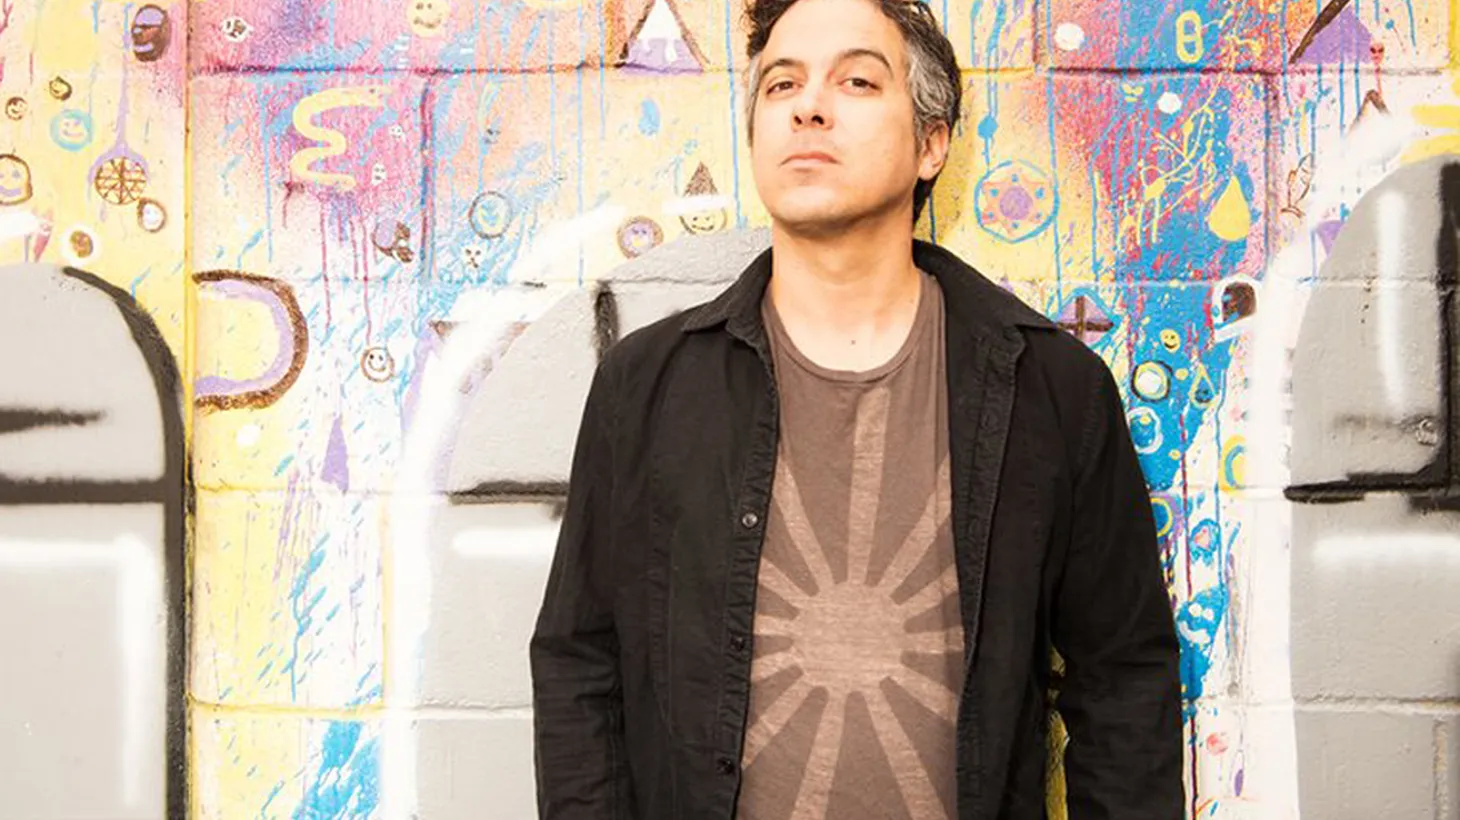 M. Ward joins us for a live session on the release date for his eighth solo album.